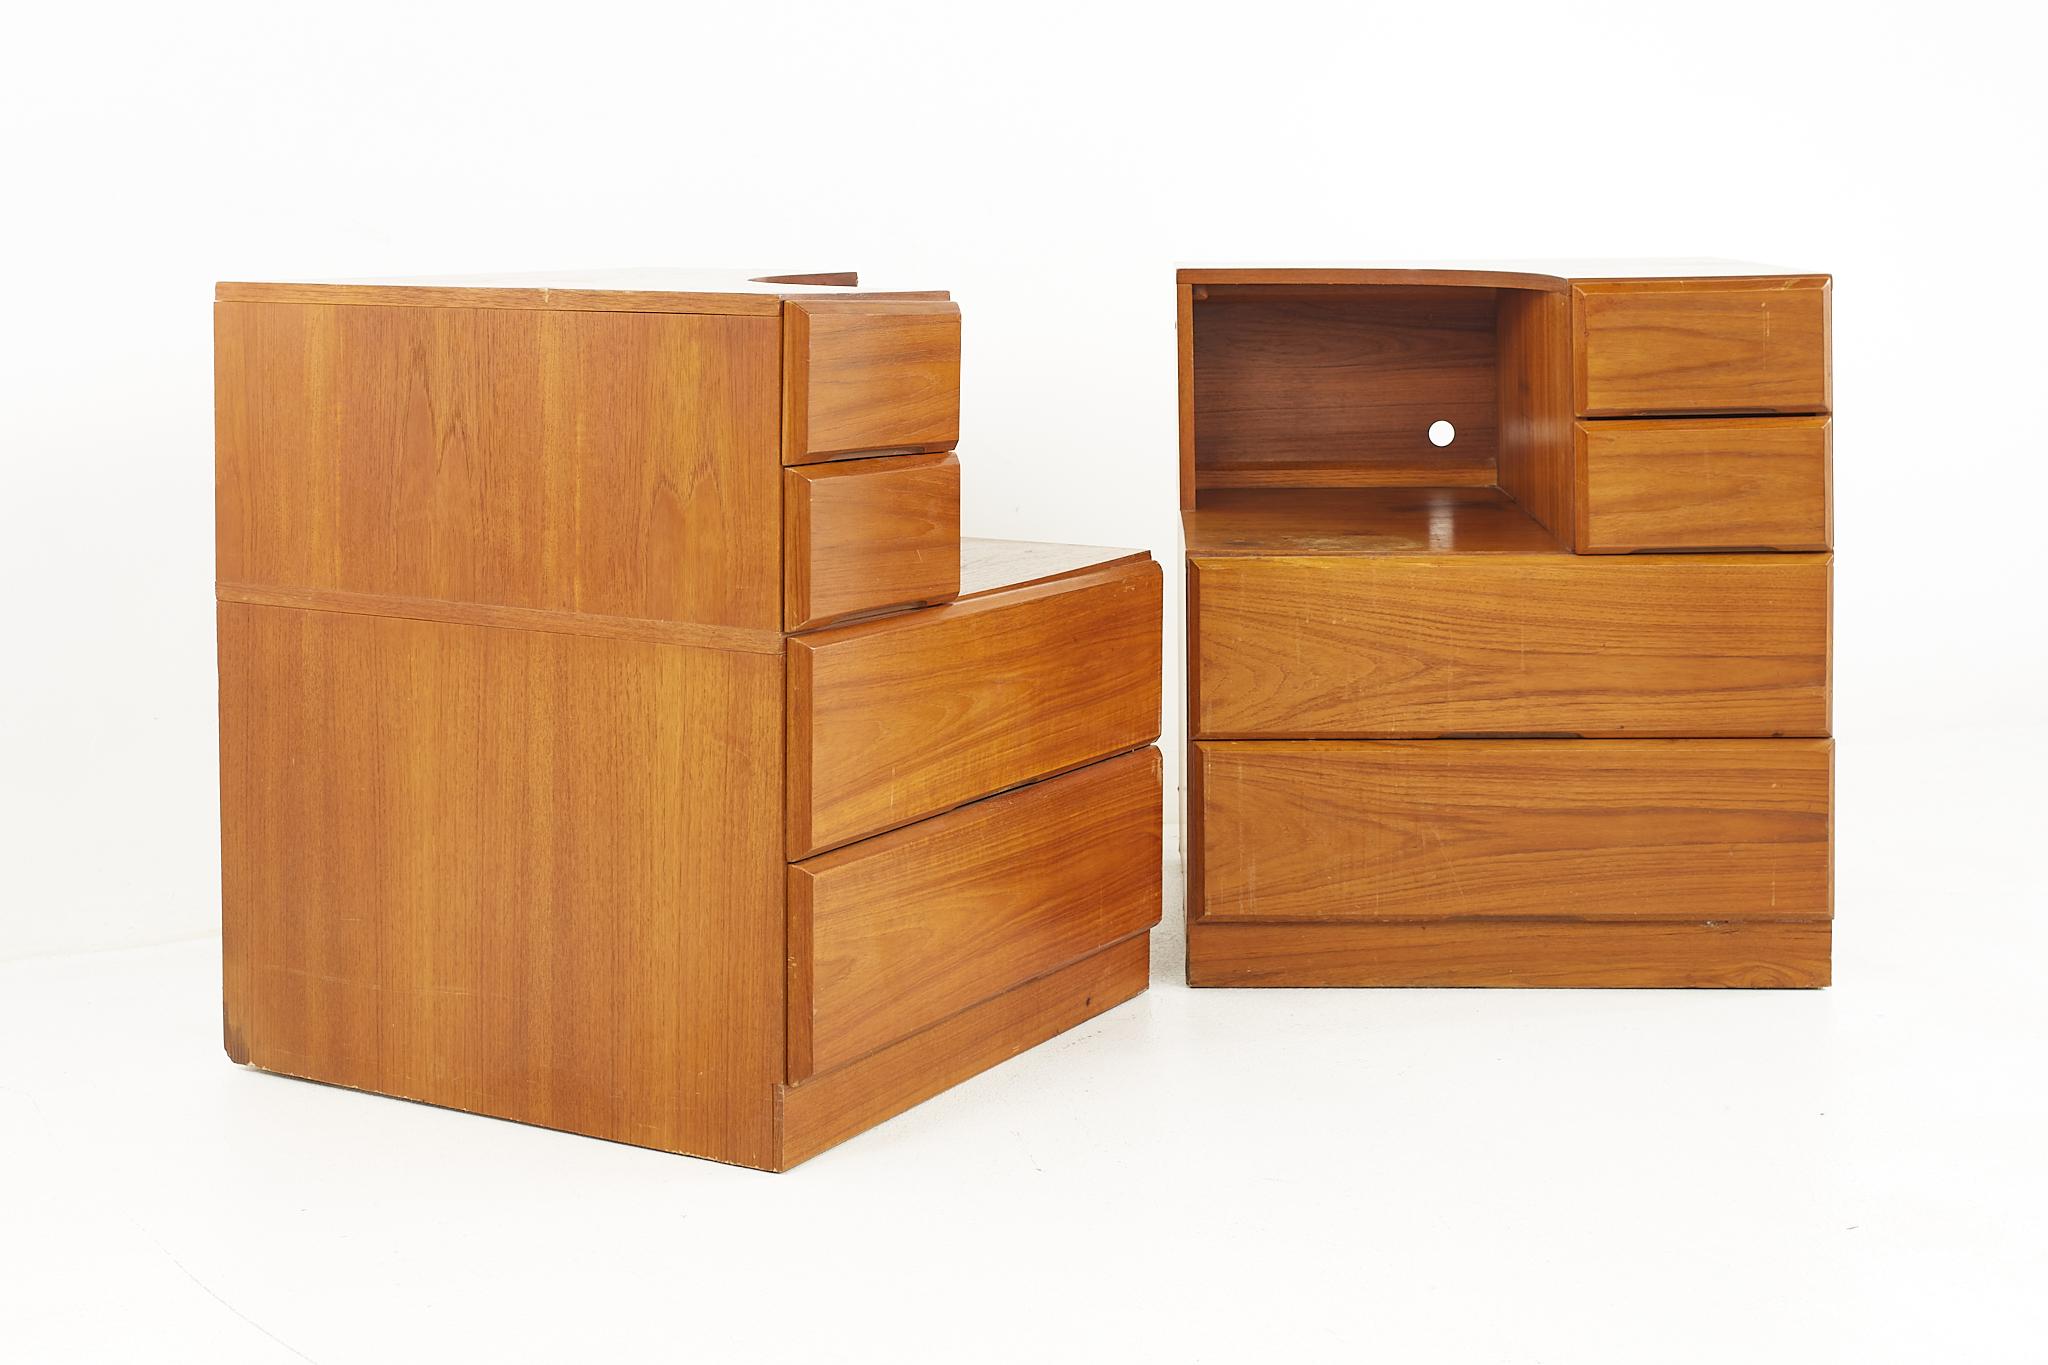 Dixie Scova mid-century teak nightstands - a pair.

Each nightstand measures: 26 wide x 26 deep x 29.25 inches high.

All pieces of furniture can be had in what we call restored vintage condition. That means the piece is restored upon purchase